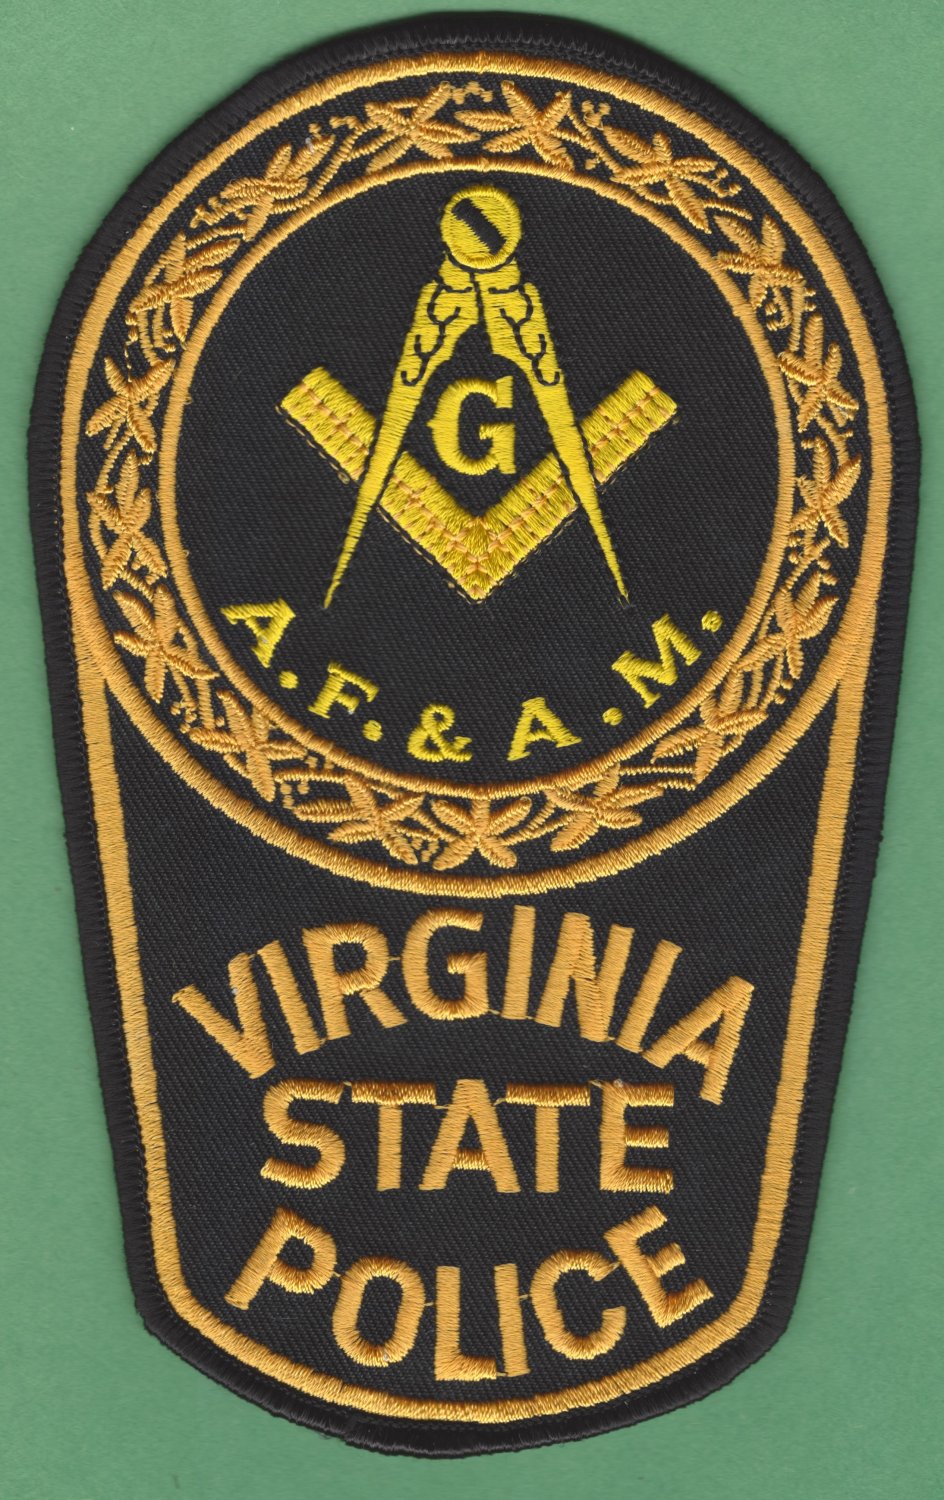 WEST VIRGINIA STATE POLICE MASONIC LODGE PATCH